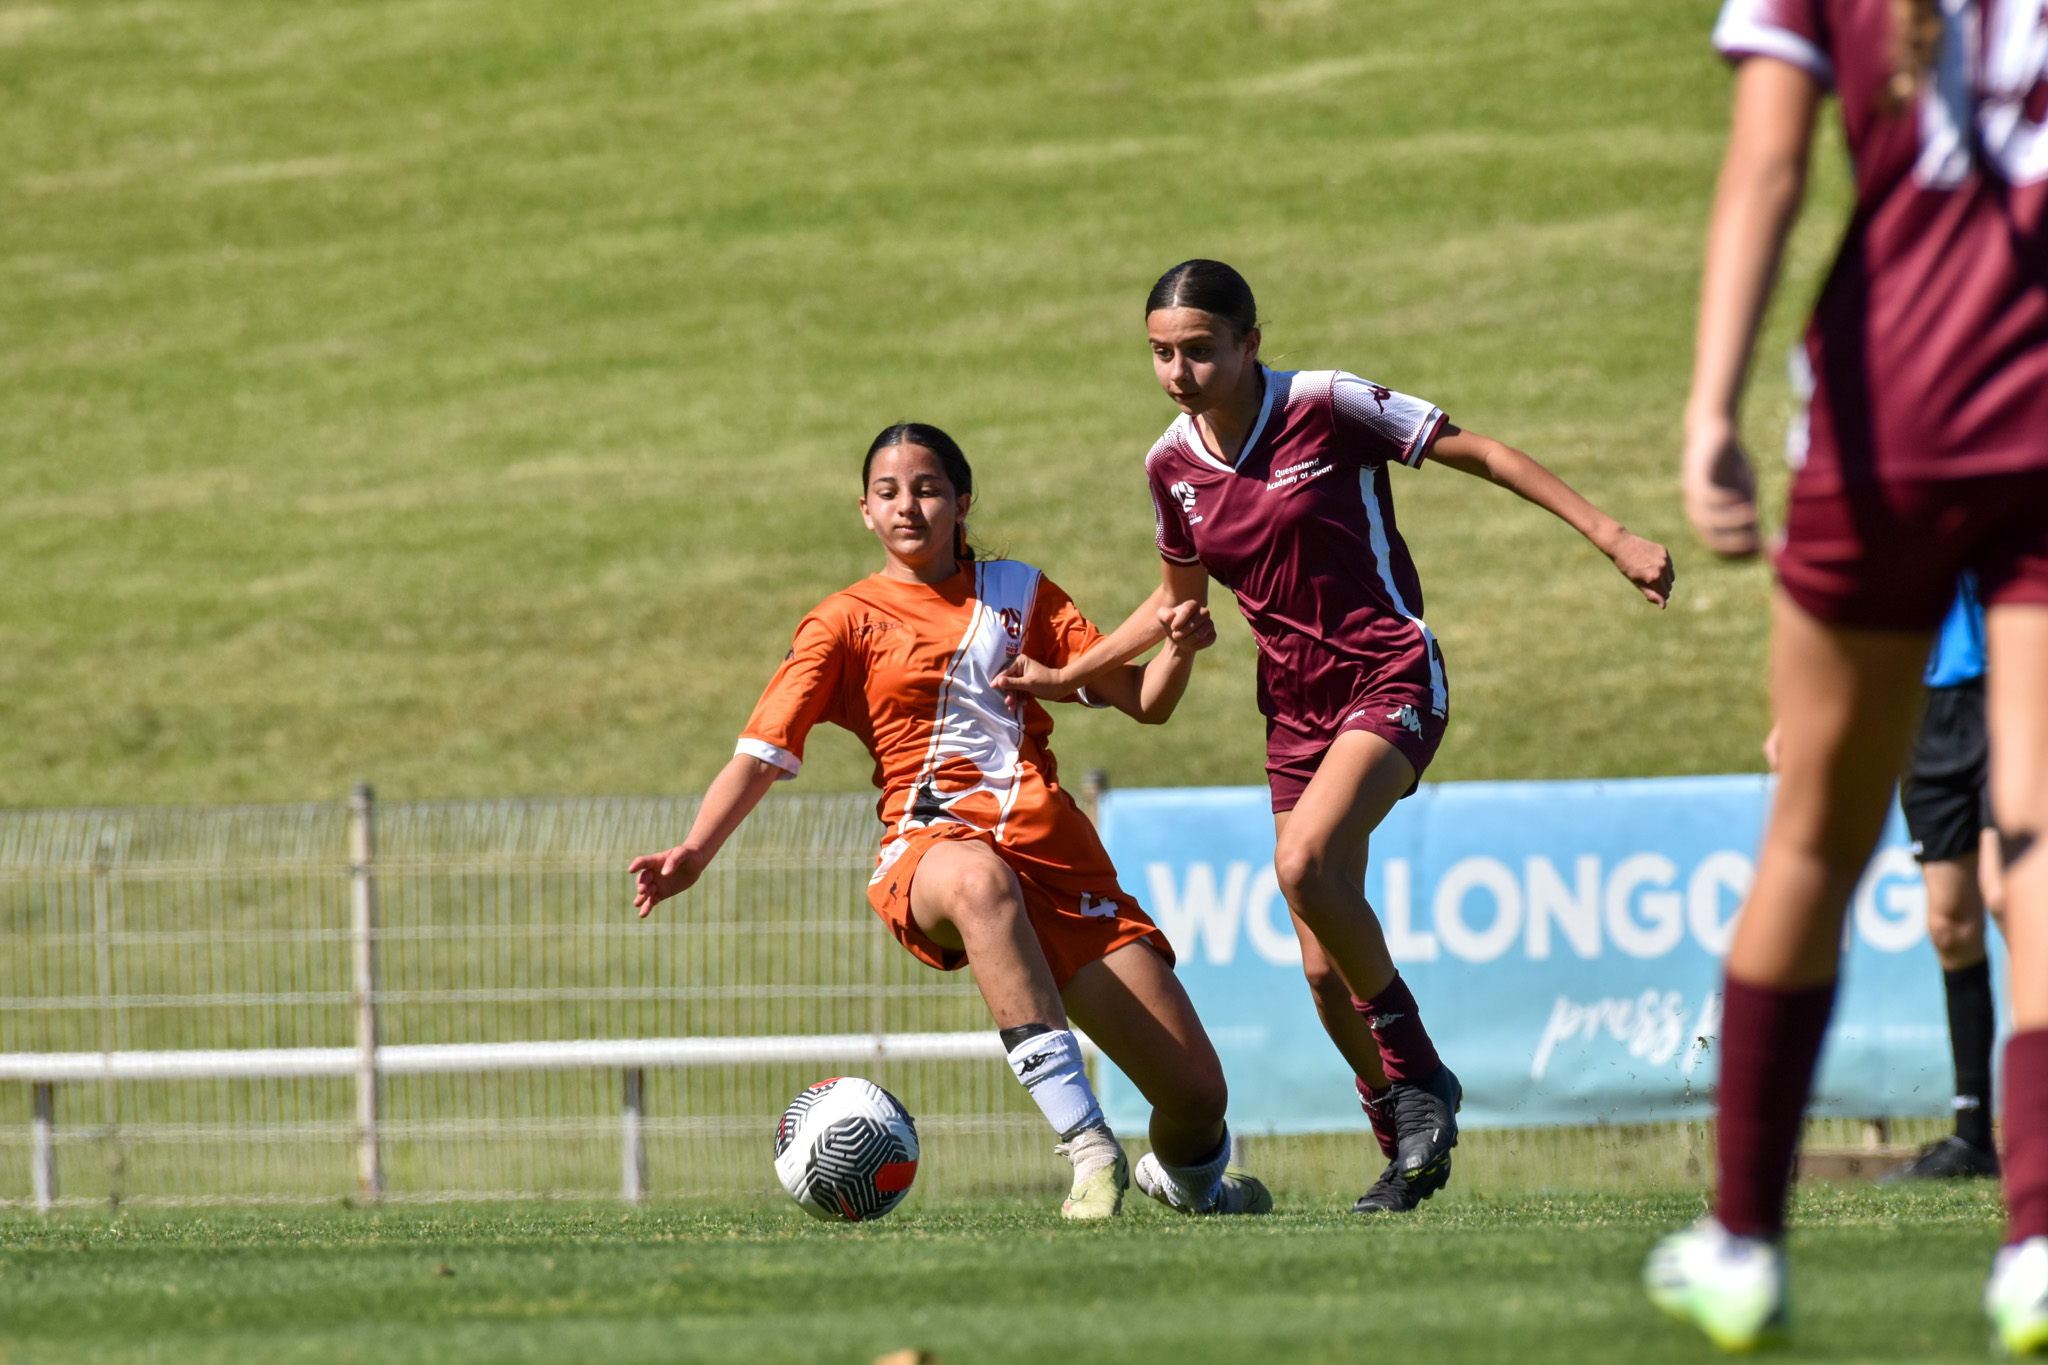 Queensland Silver taking on the Northern Territory in the Under 14 Pool B game during the National Youth Championships 2023 Girls' Tournament Day at WIN Stadium.